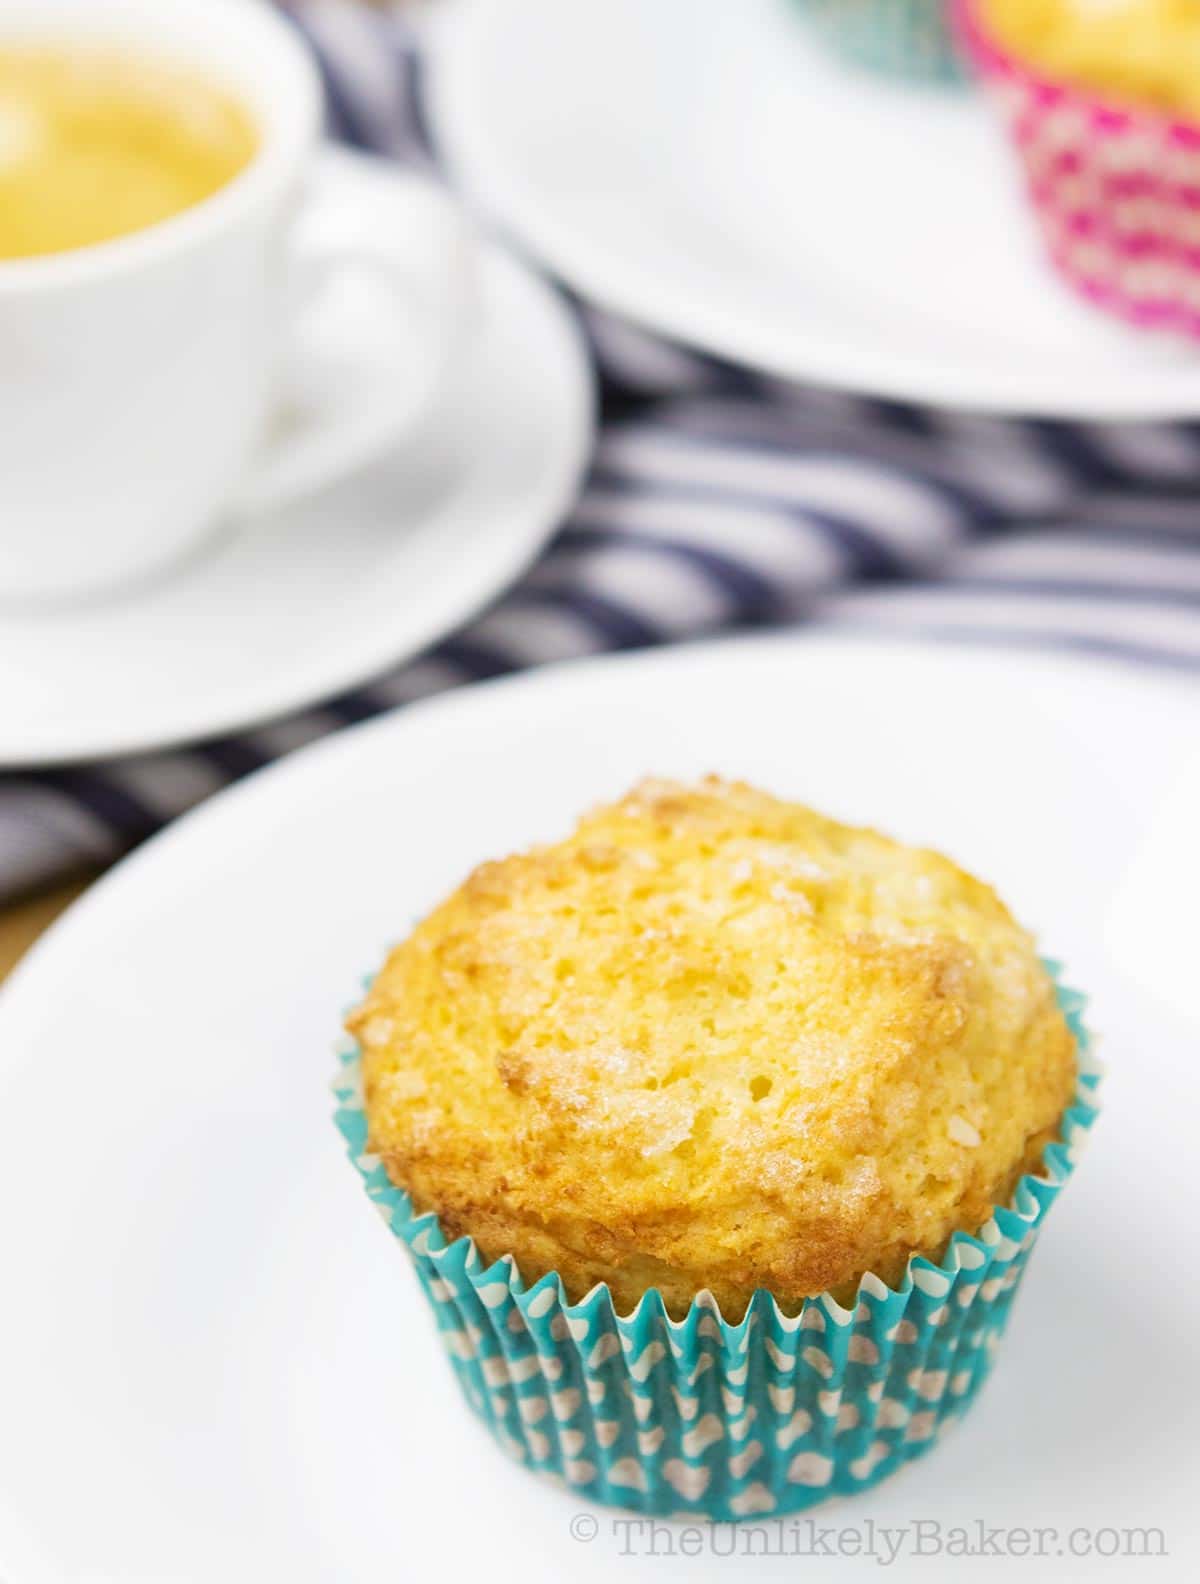 Lemon Ricotta Muffins Recipe (step-by-step photos) - The Unlikely Baker